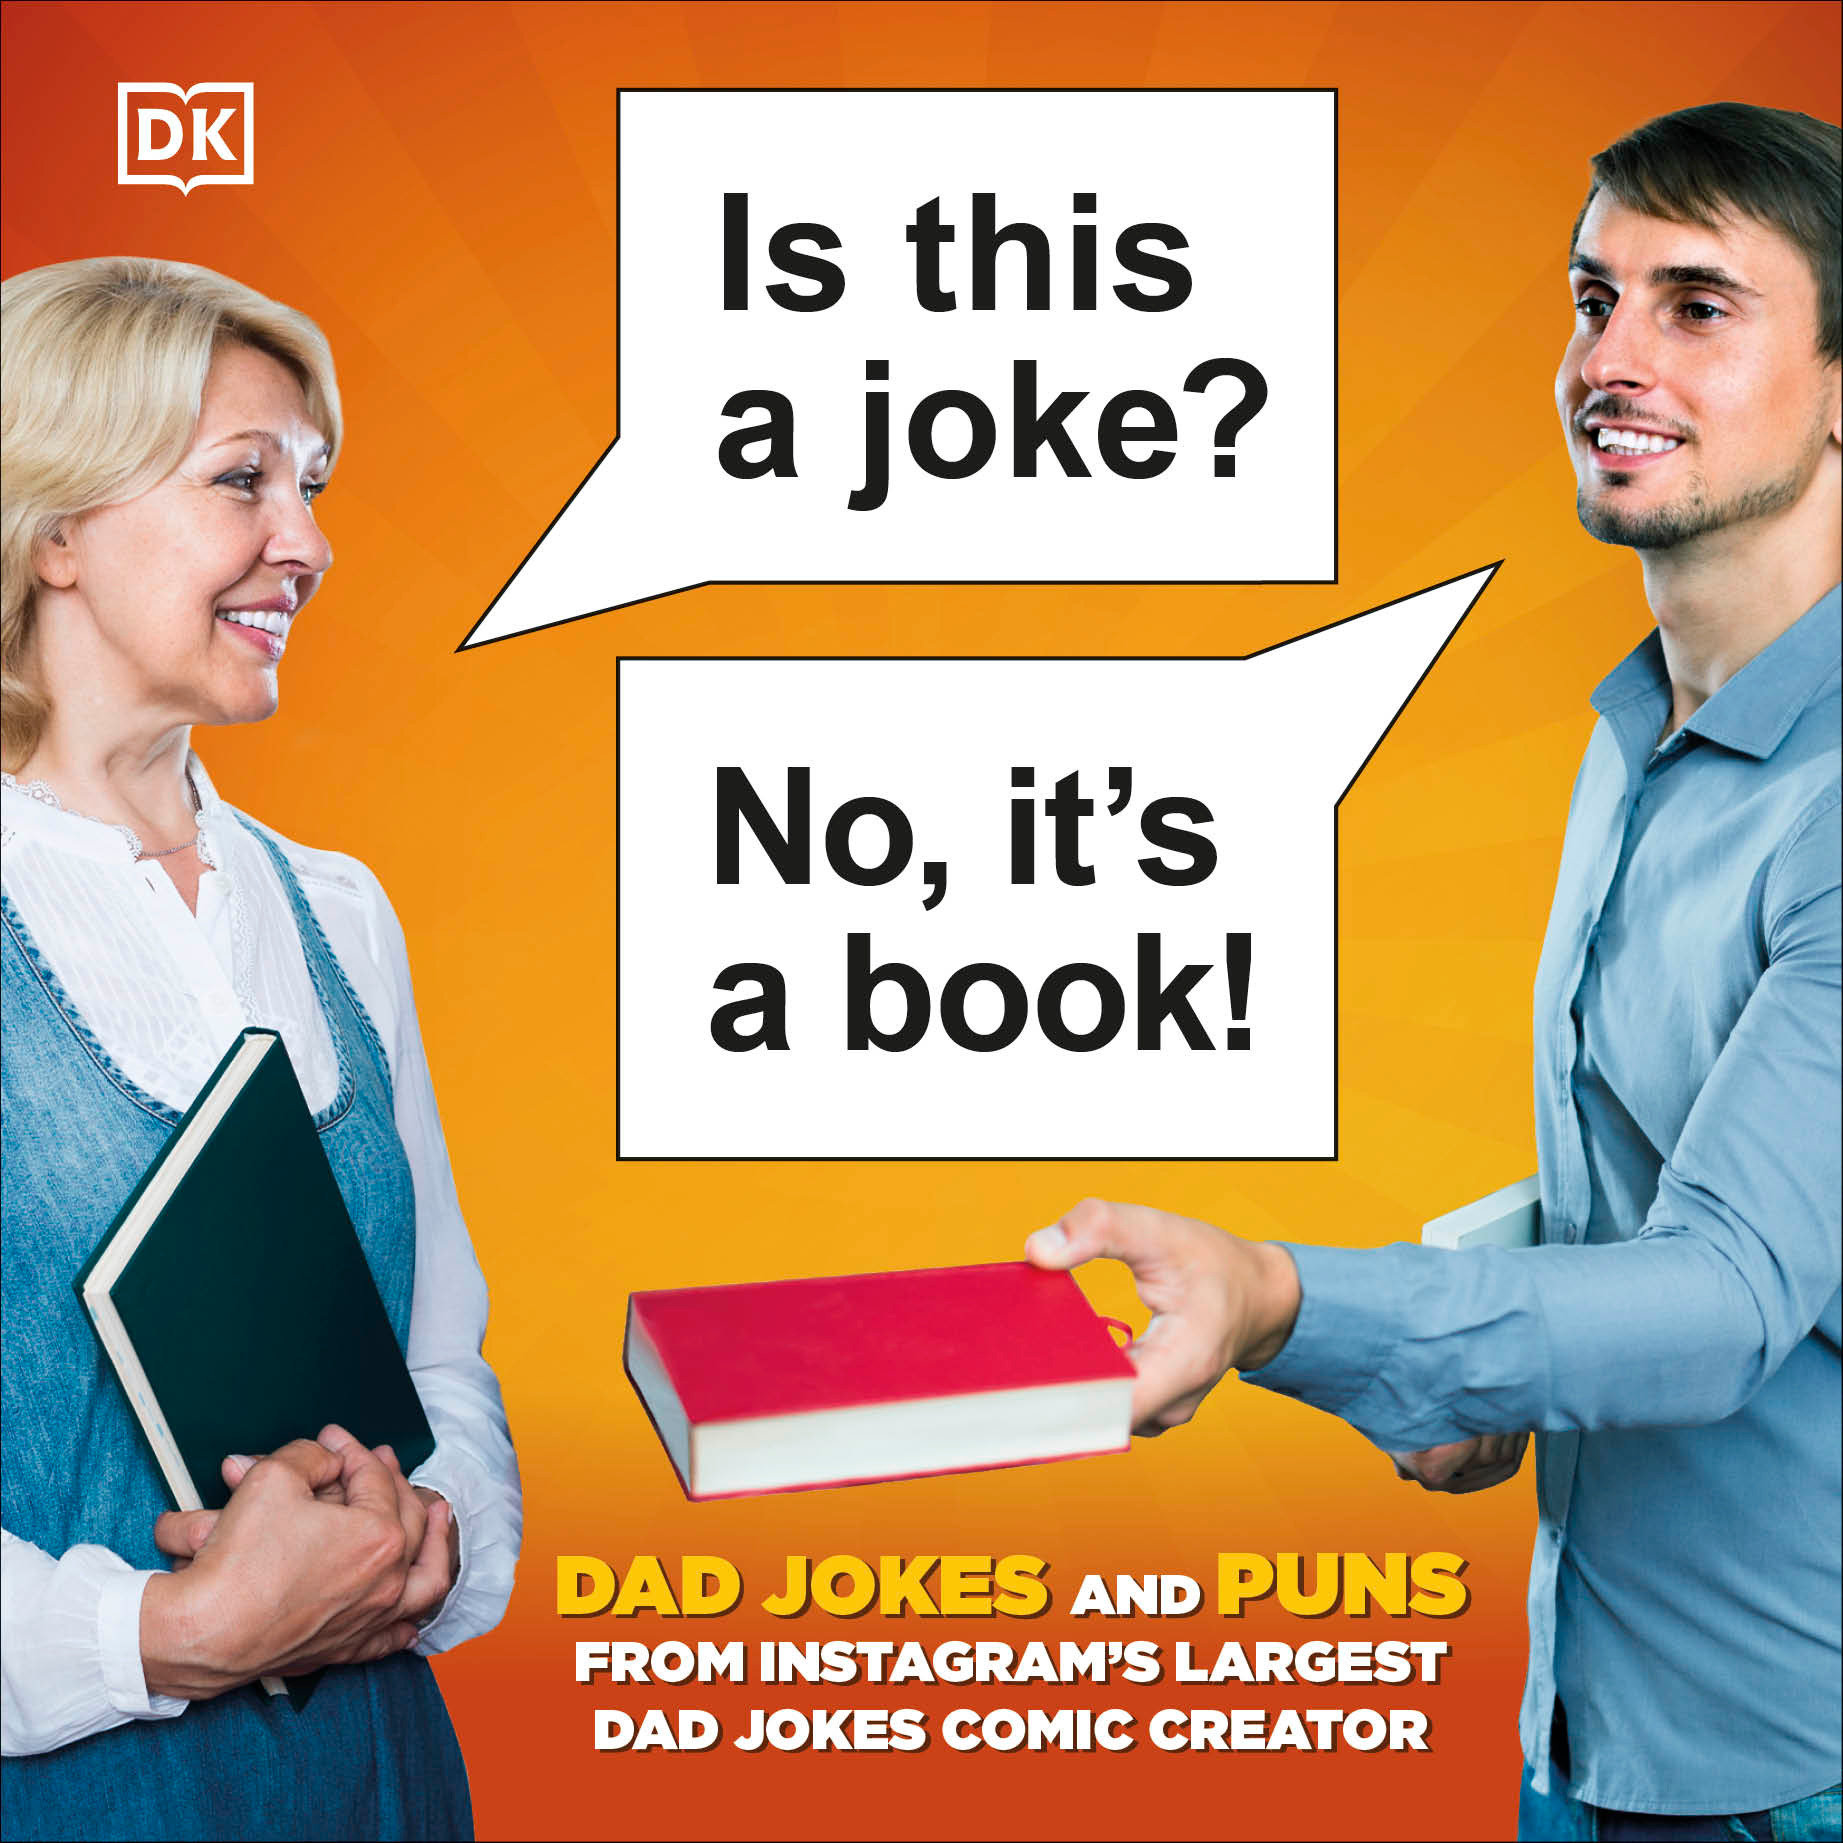 Is This A Joke? No, It's A Book! 100 Puns And Dad Jokes From Instagram’s Largest Pun Comic Creator